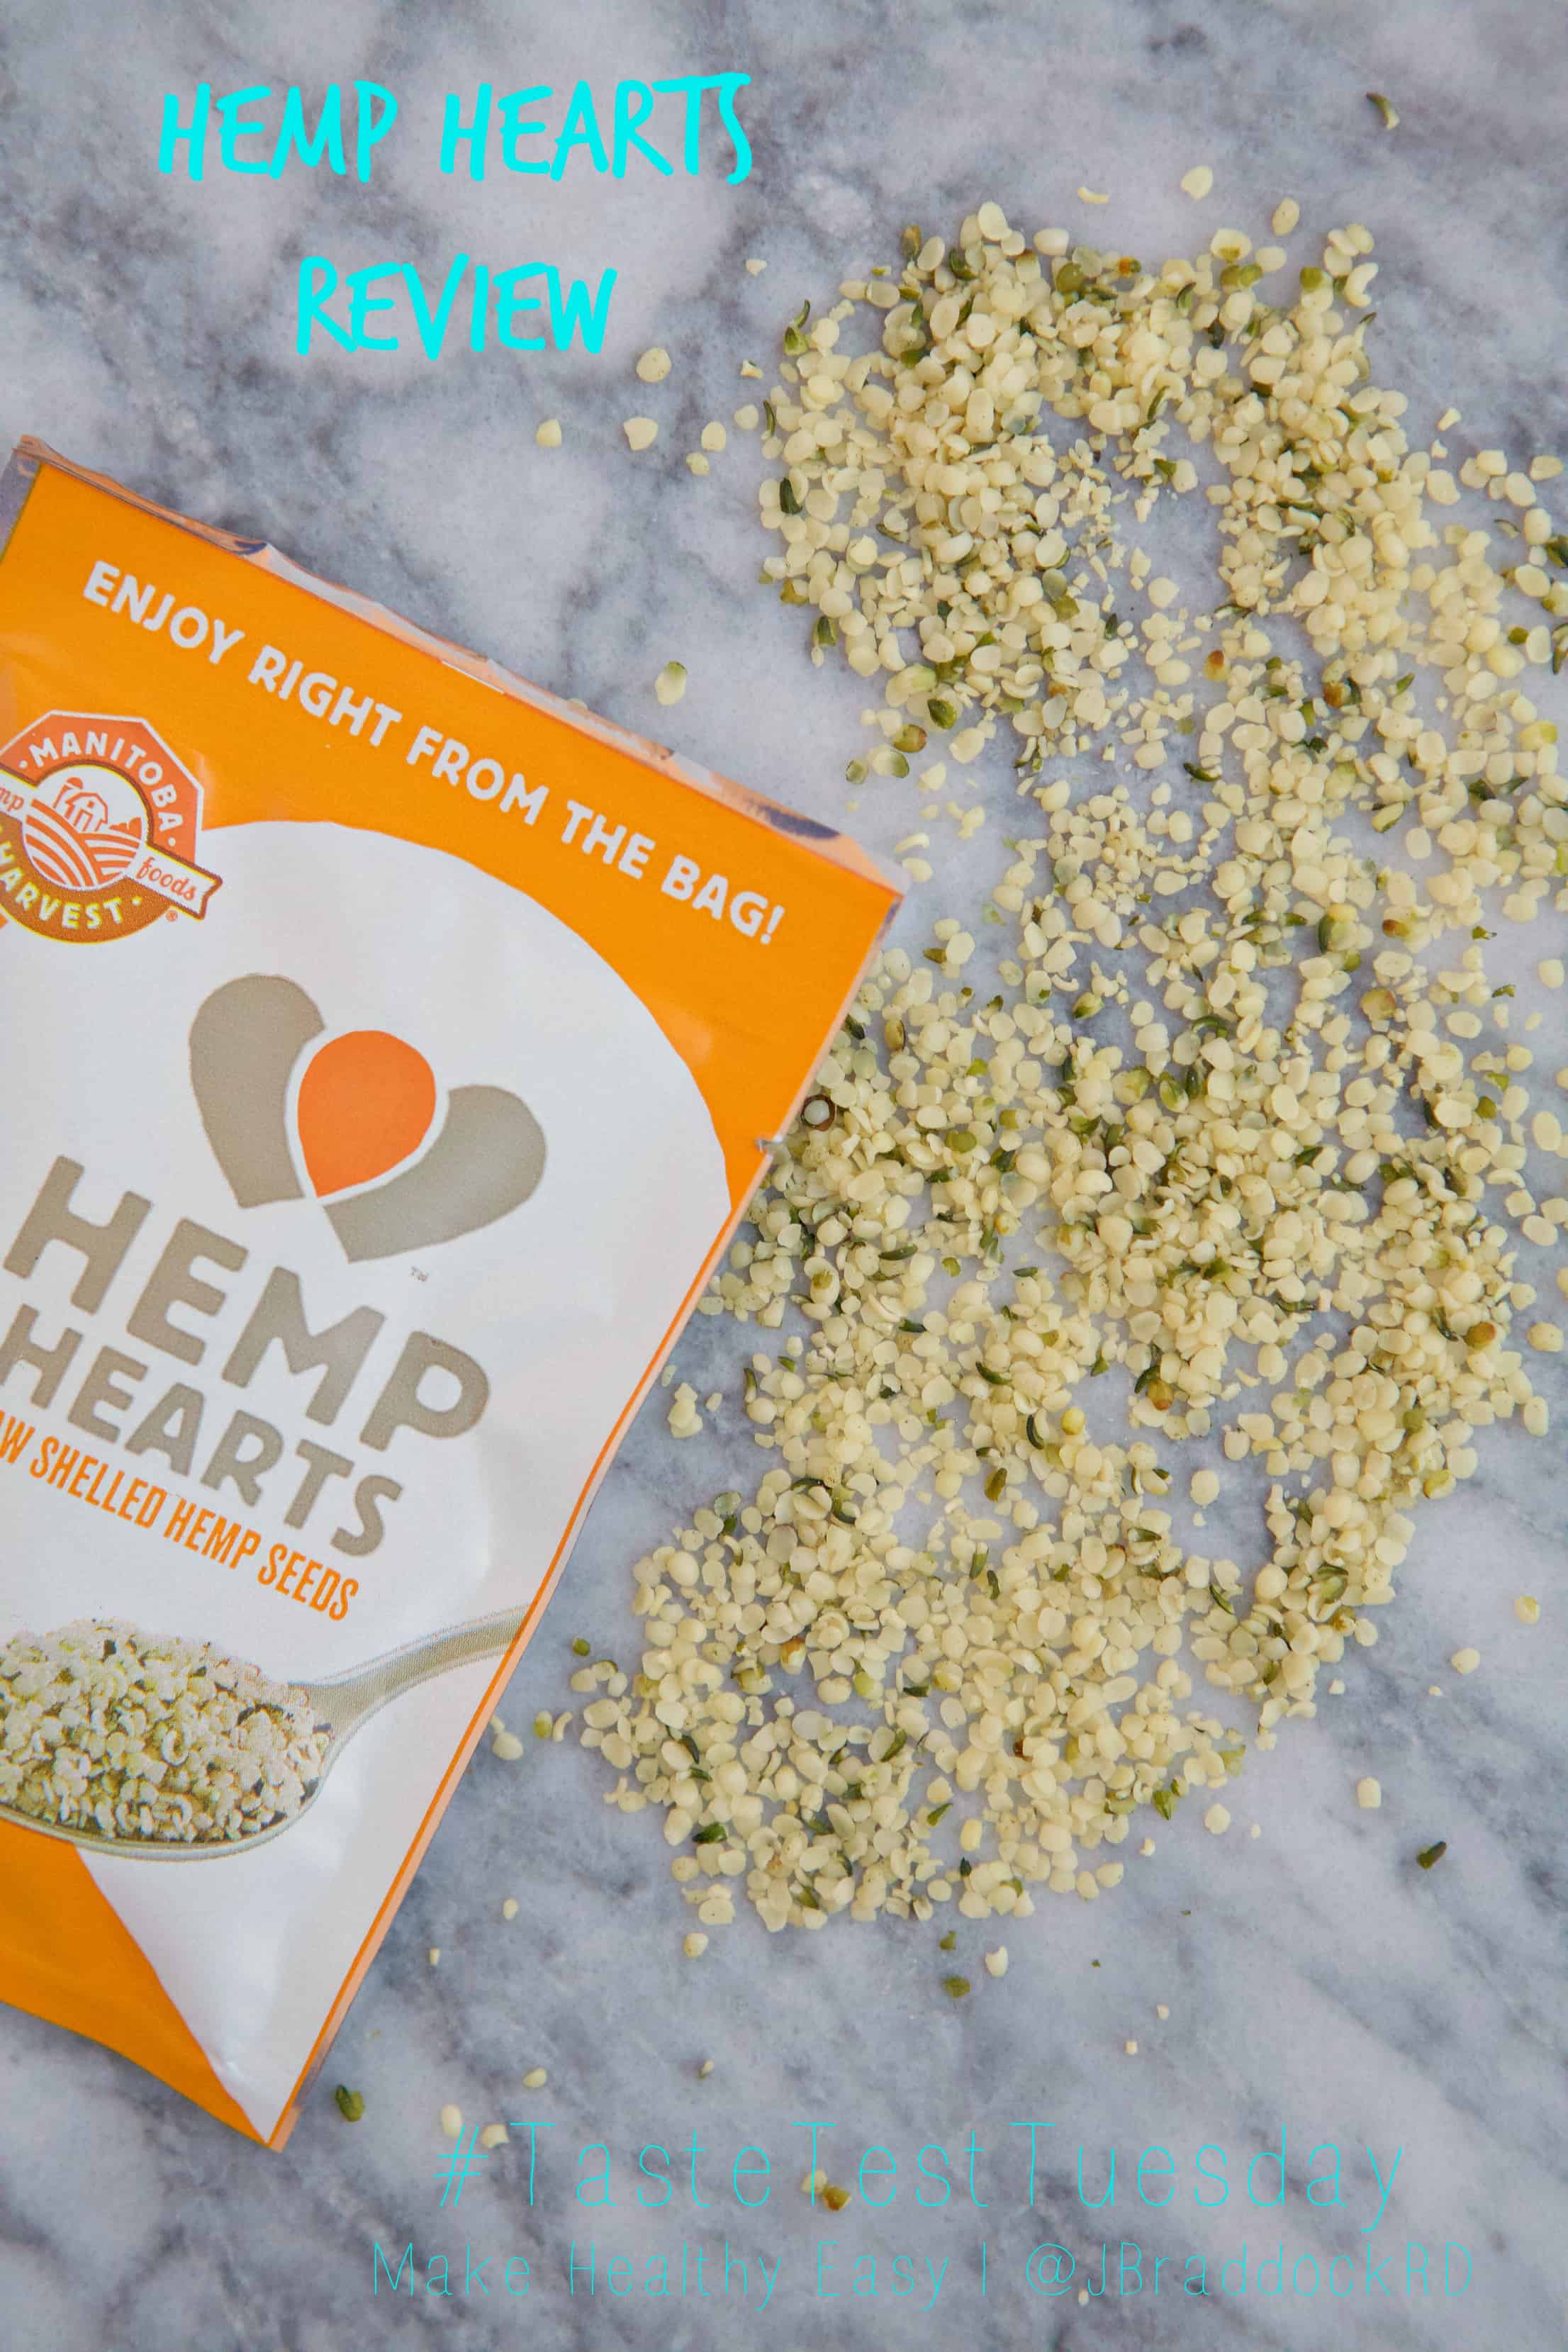 Have you heard about hemp hearts? They're the chewy inside of a hemp seed and packed with flavor, texture and nutrition. See if you should be eating them in this #TasteTestTuesday review on #MakeHealthyEasy post. via @JBraddockRD www.JennaBraddock.com